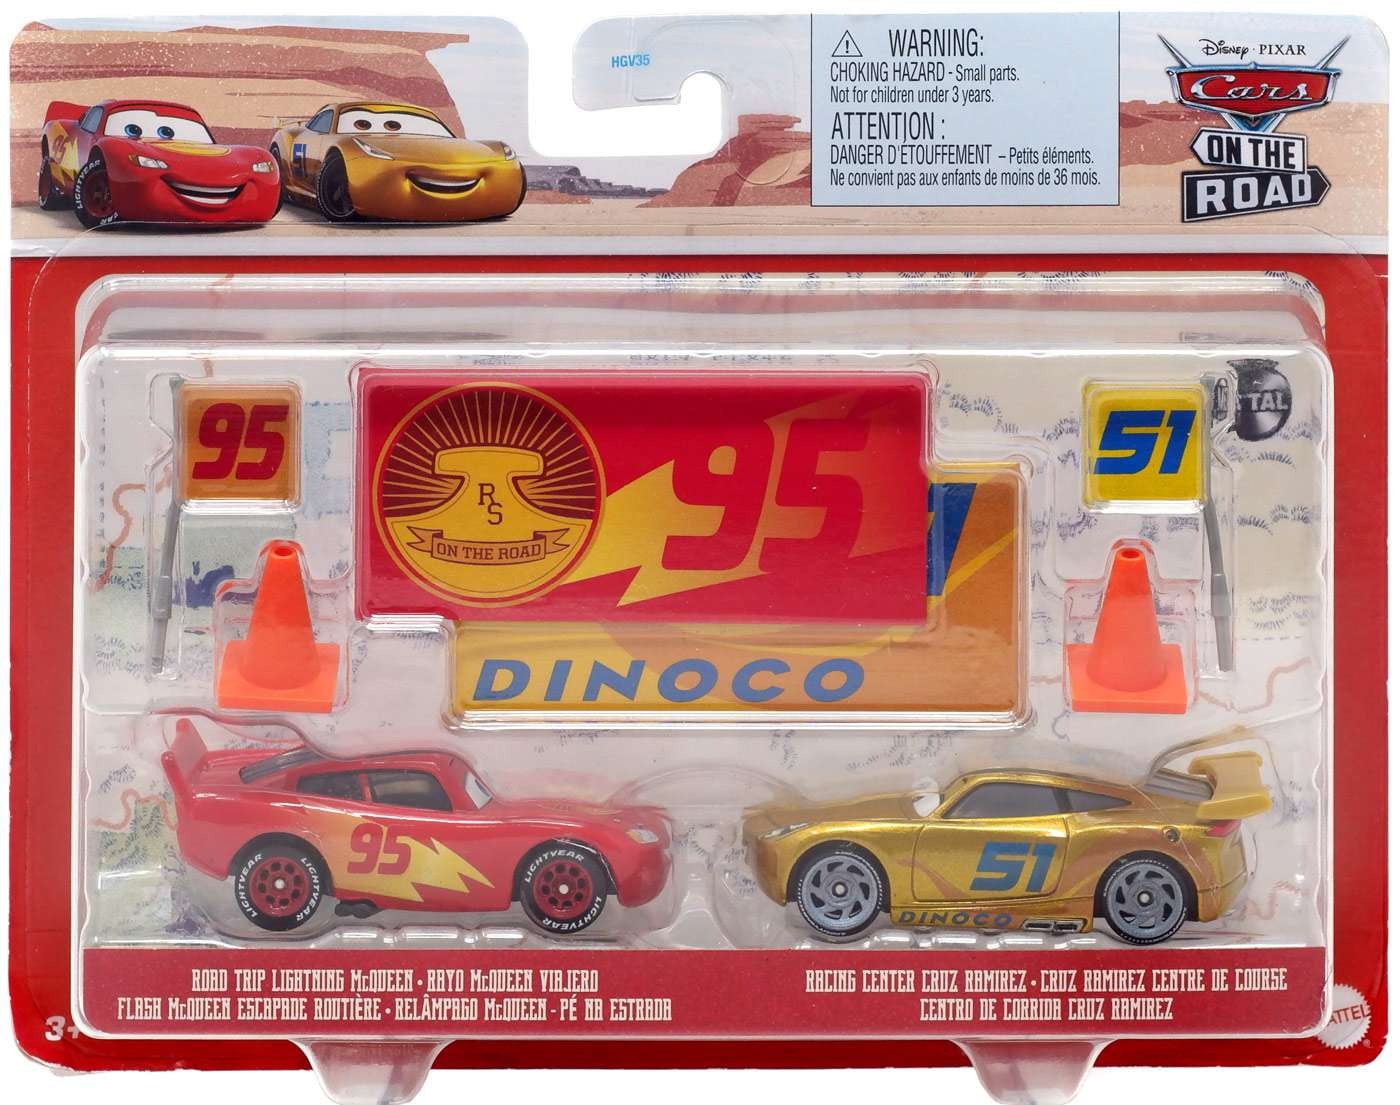  Disney Cars Toys Die-cast Lightning McQueen Vehicle : Toys &  Games